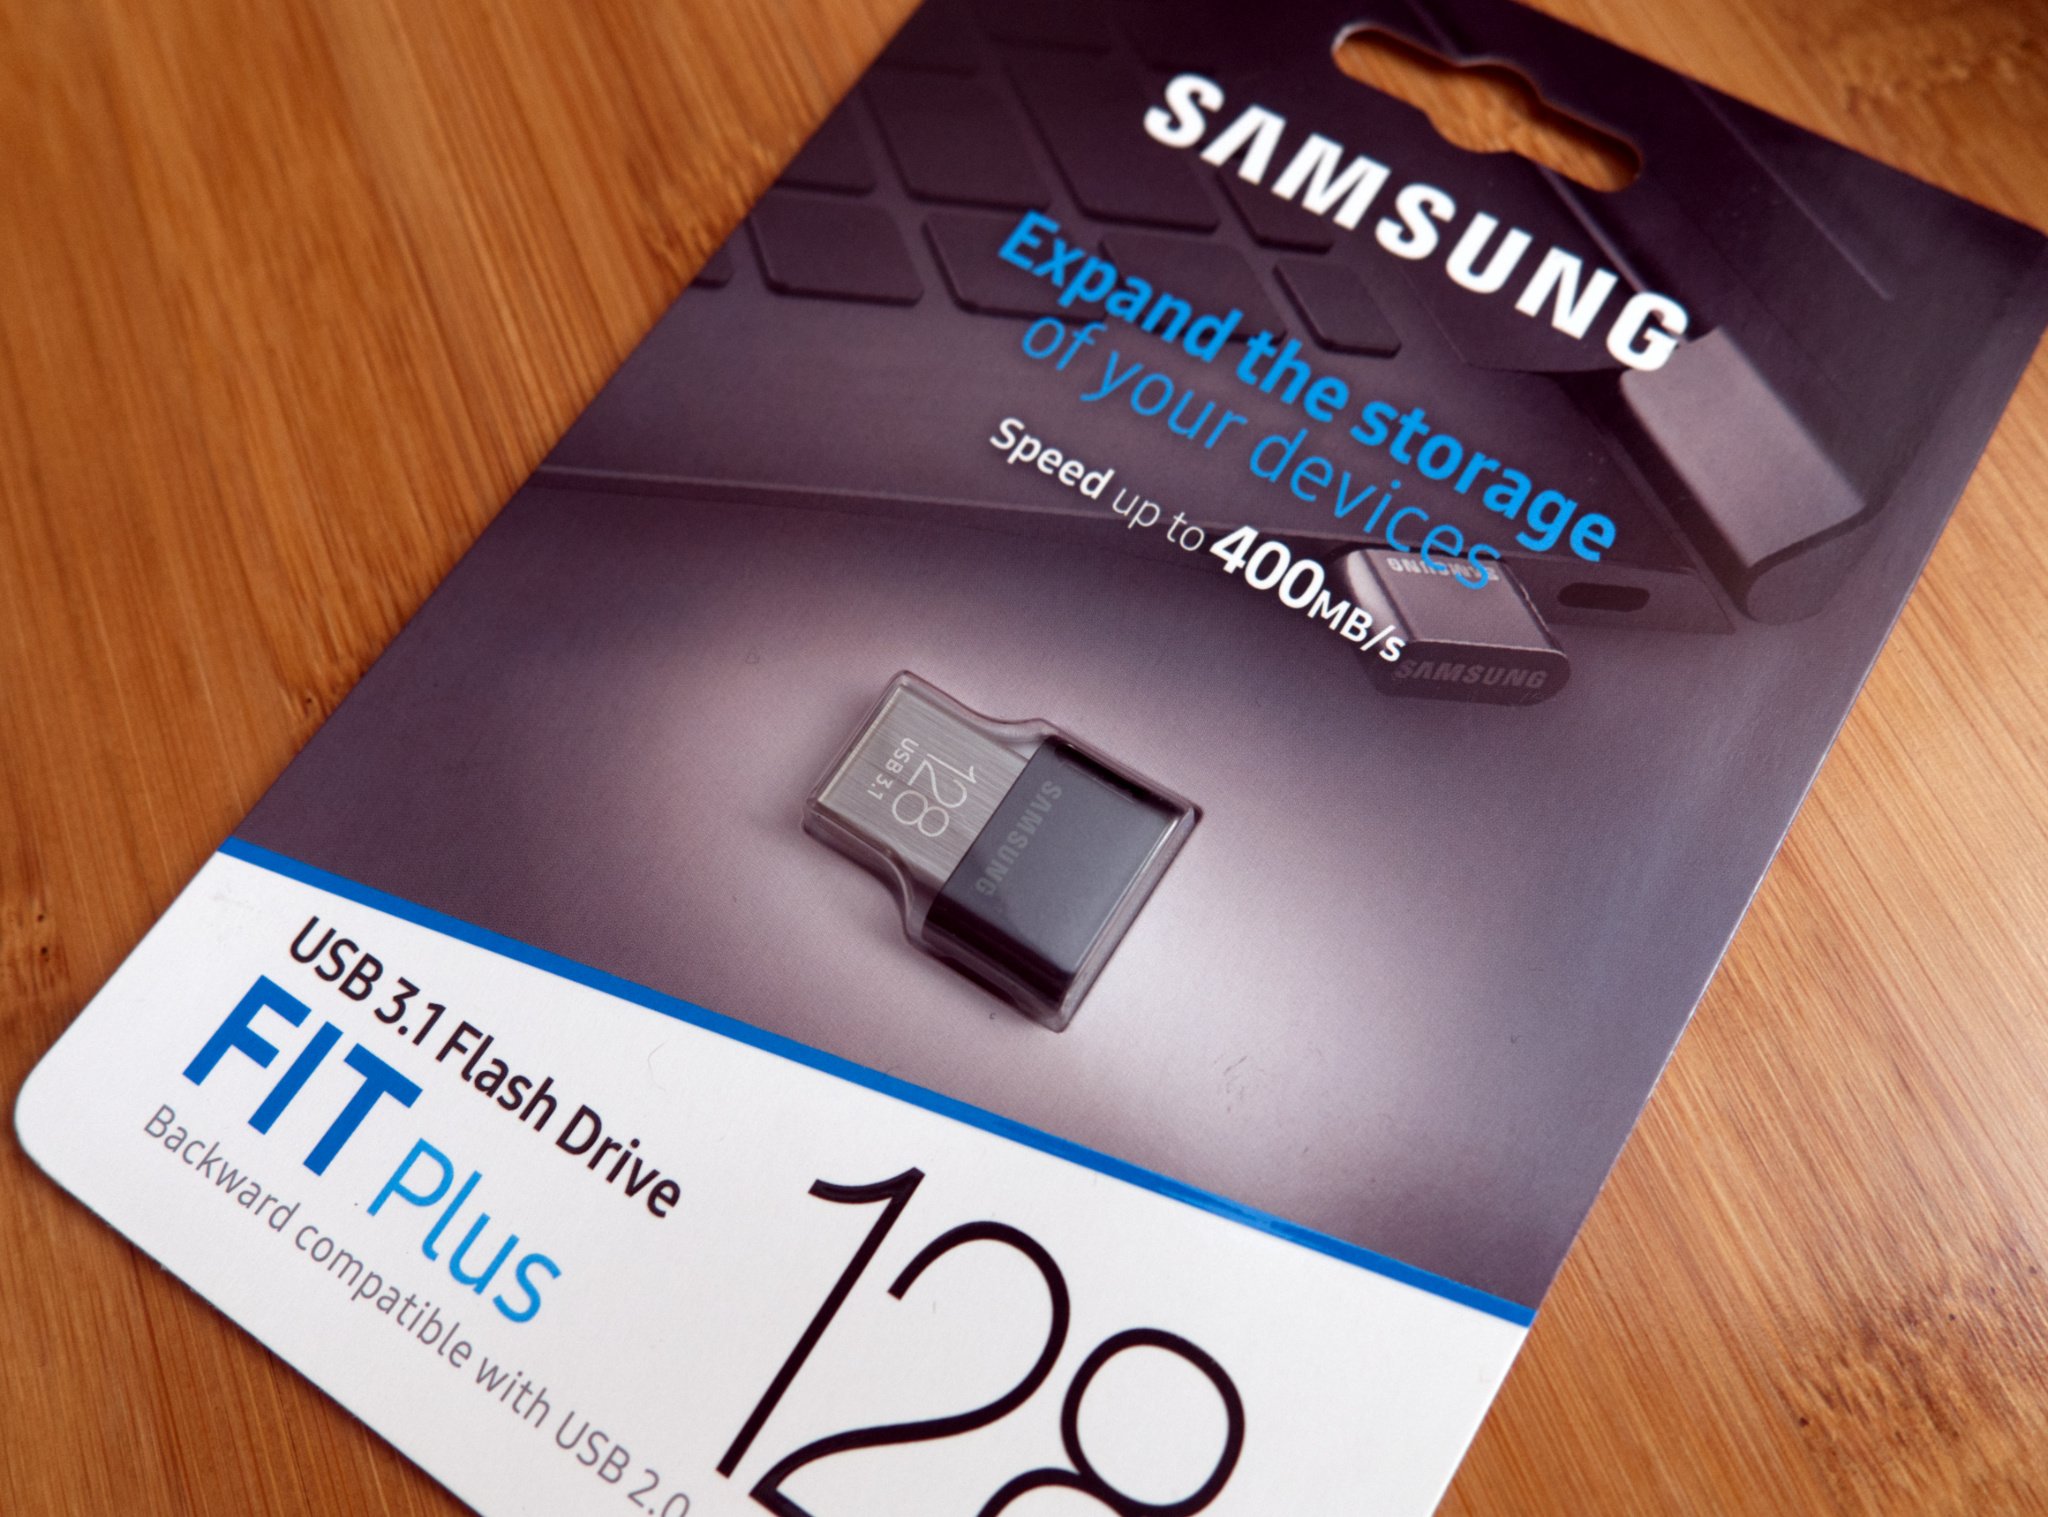 Samsung Fit Plus USB Flash Drive in Package